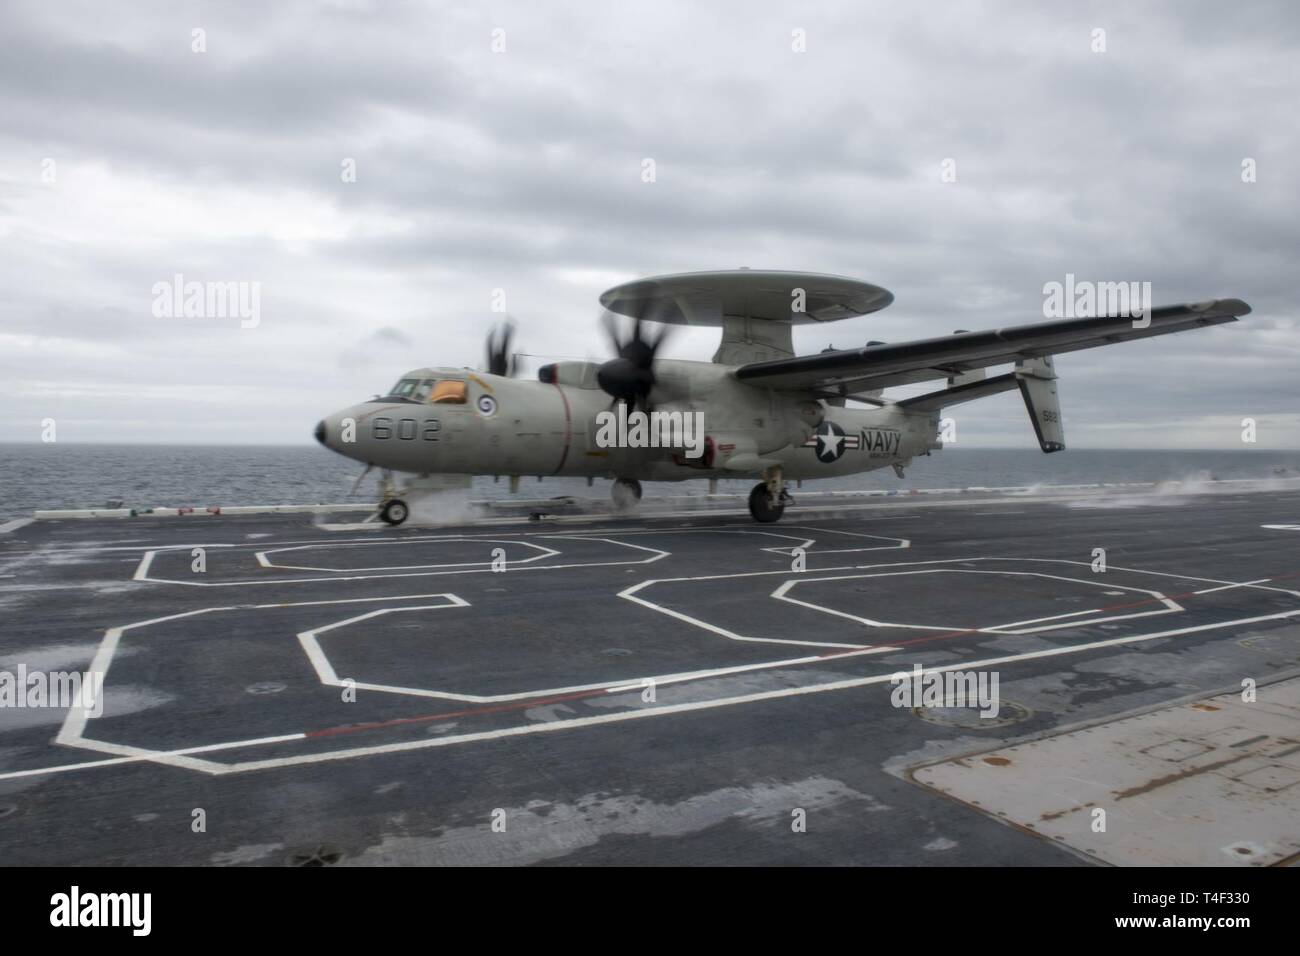 OCEAN (April 9, 2019) An E-2CC Hawkeye early warning and attack aircraft, assigned to the 'Screwtops' of Airborne Early Warning Squadron (VAW) 123 takes off on the flight deck of the aircraft carrier USS Dwight D. Eisenhower (CVN 69). Ike is underway conducting flight deck certification during the basic phase of the Optimized Fleet Response Plan (OFRP). Stock Photo